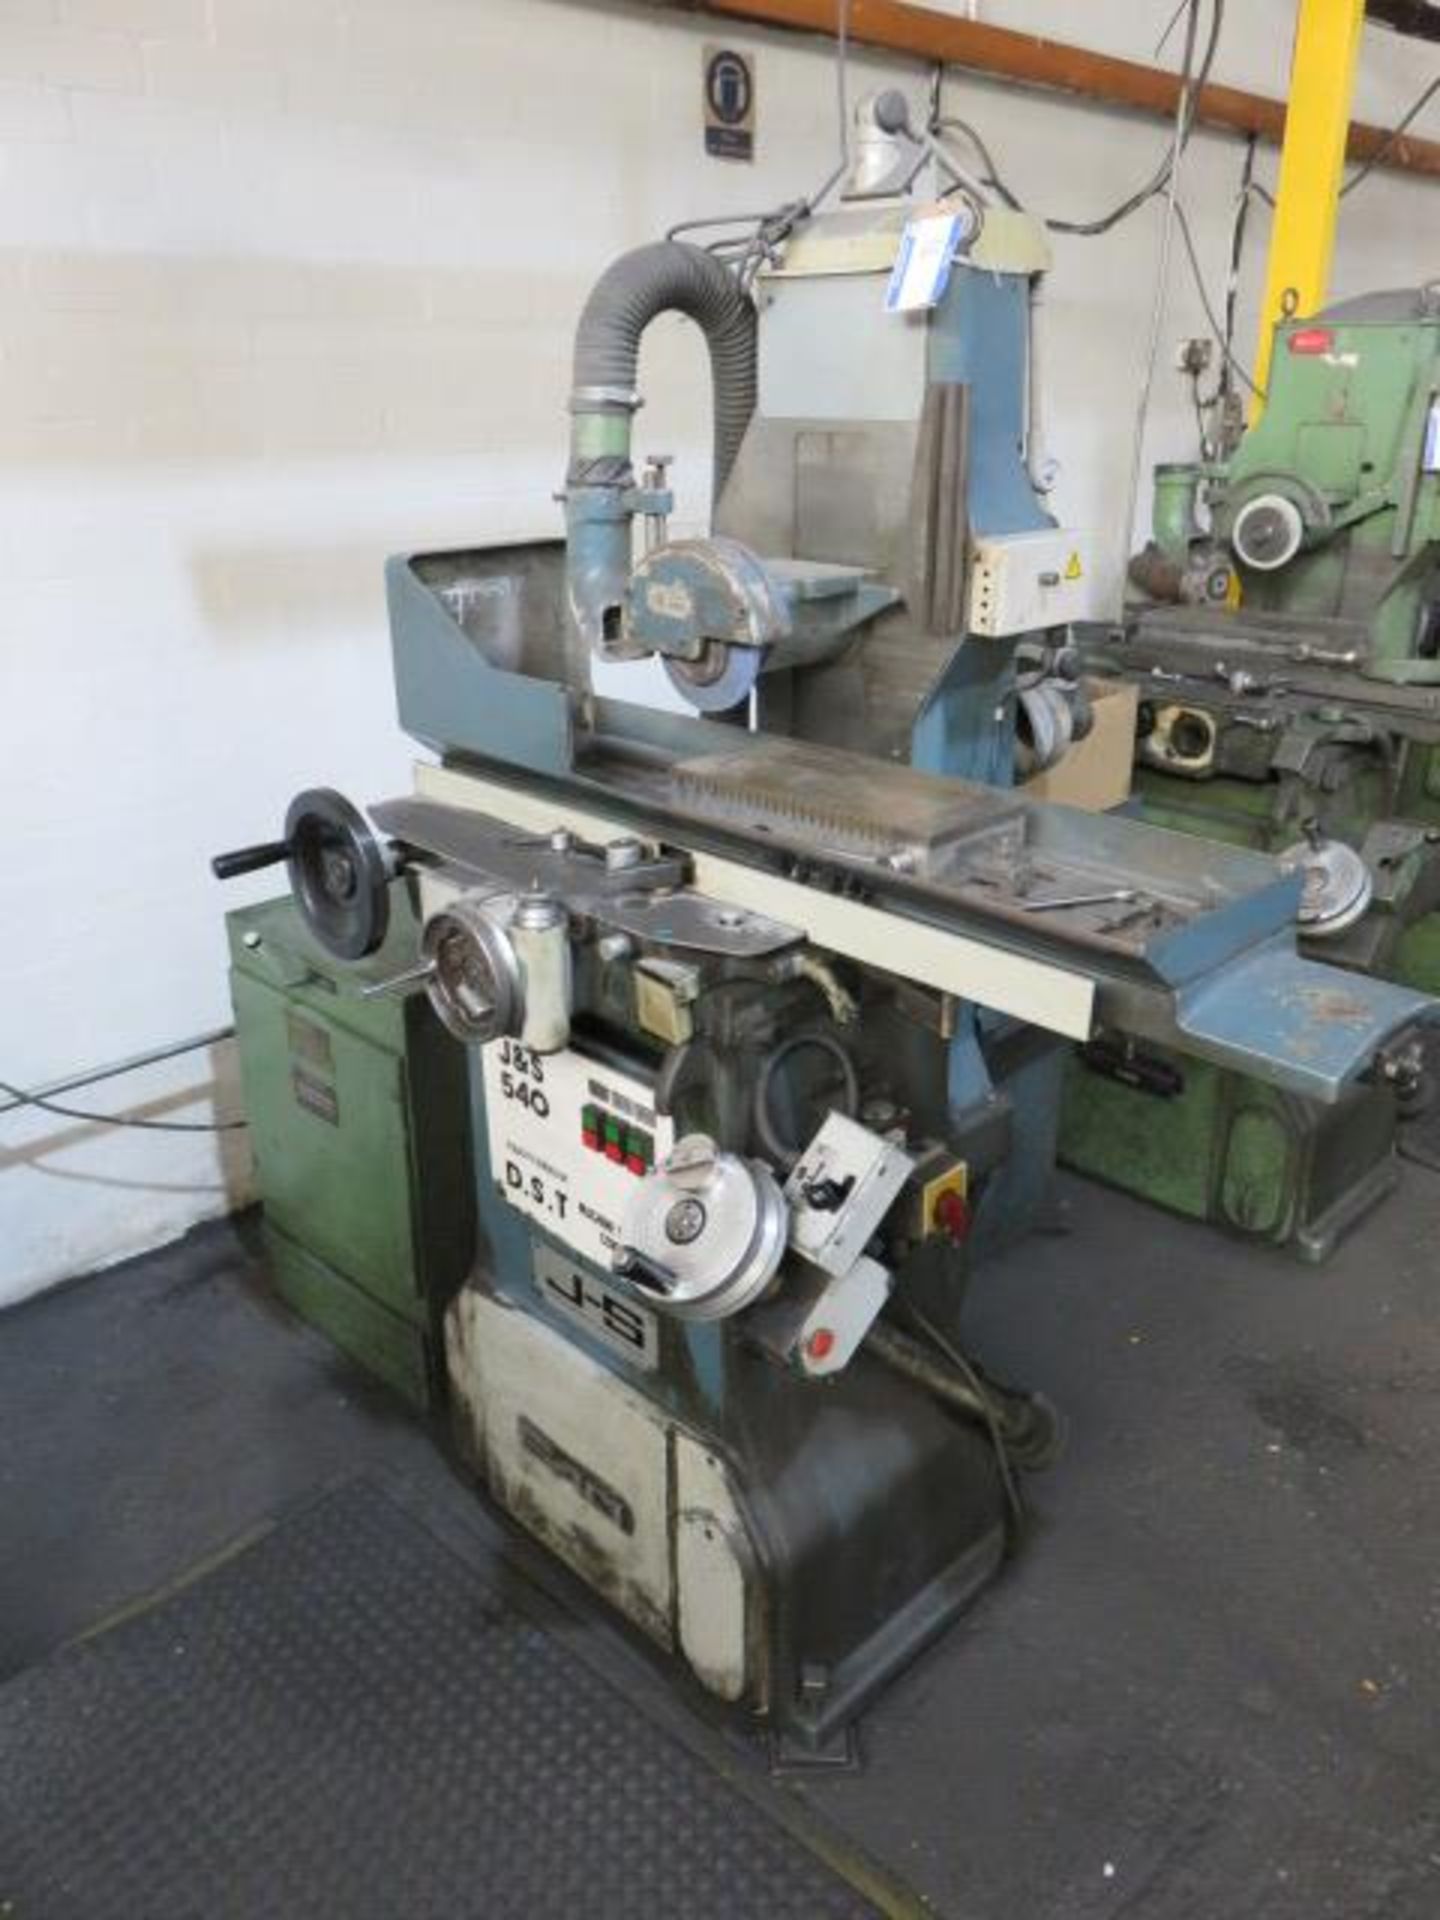 Jones-Shipman 540 Surface Grinder Complete with Drytex DT21 Dust Extraction & Magnetic Table. Serial